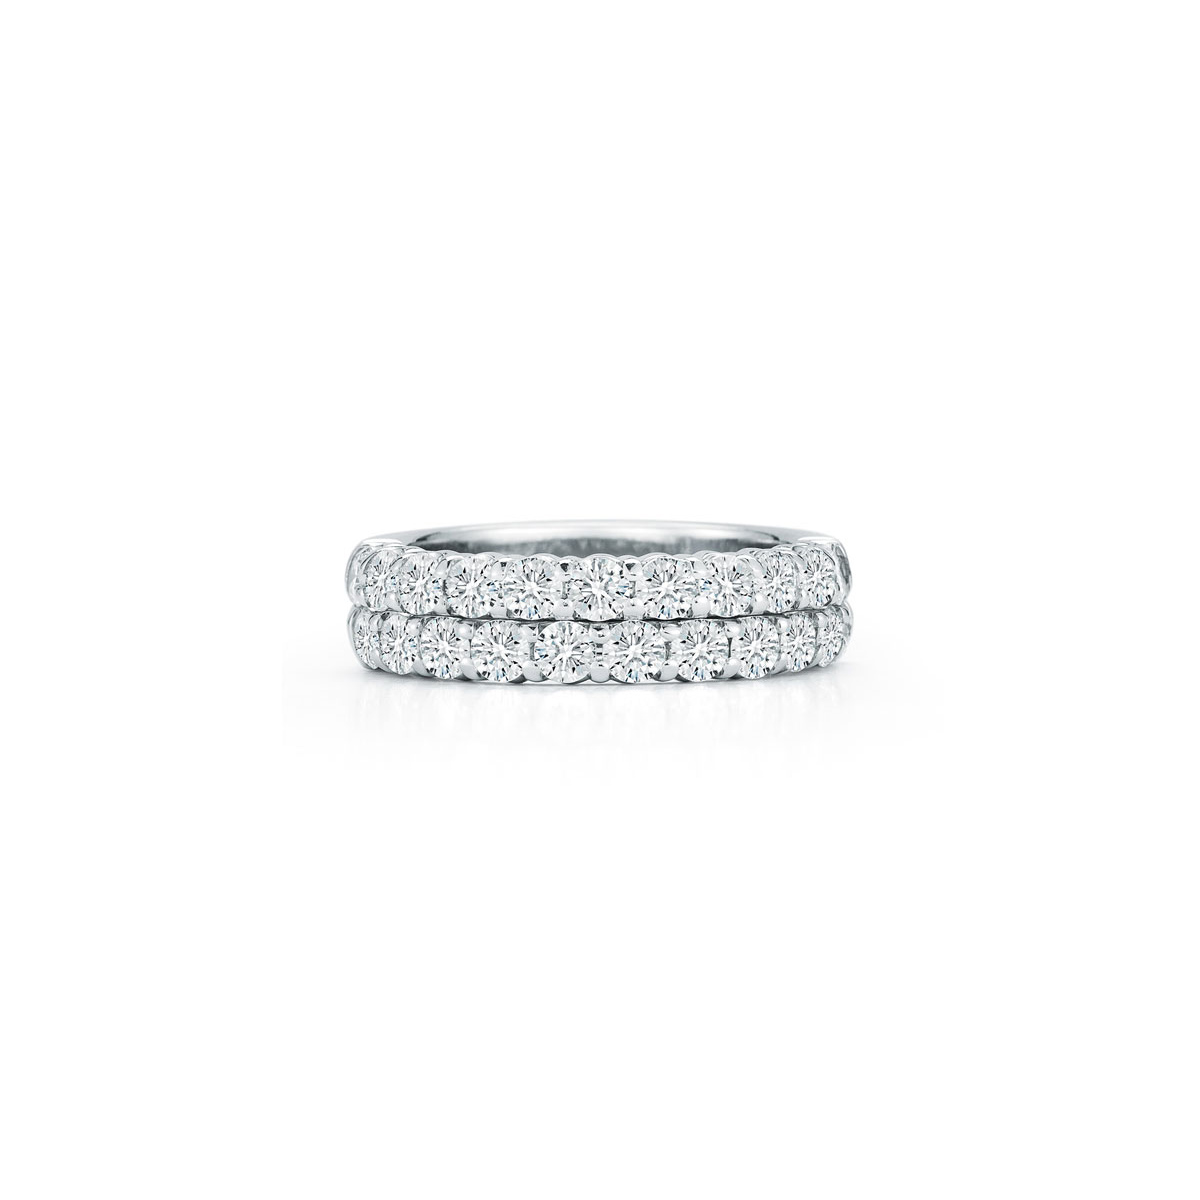 Wholesale Custom Two-Row OEM/ODM Jewelry Eternity Band Ring in 18K White Gold Plating